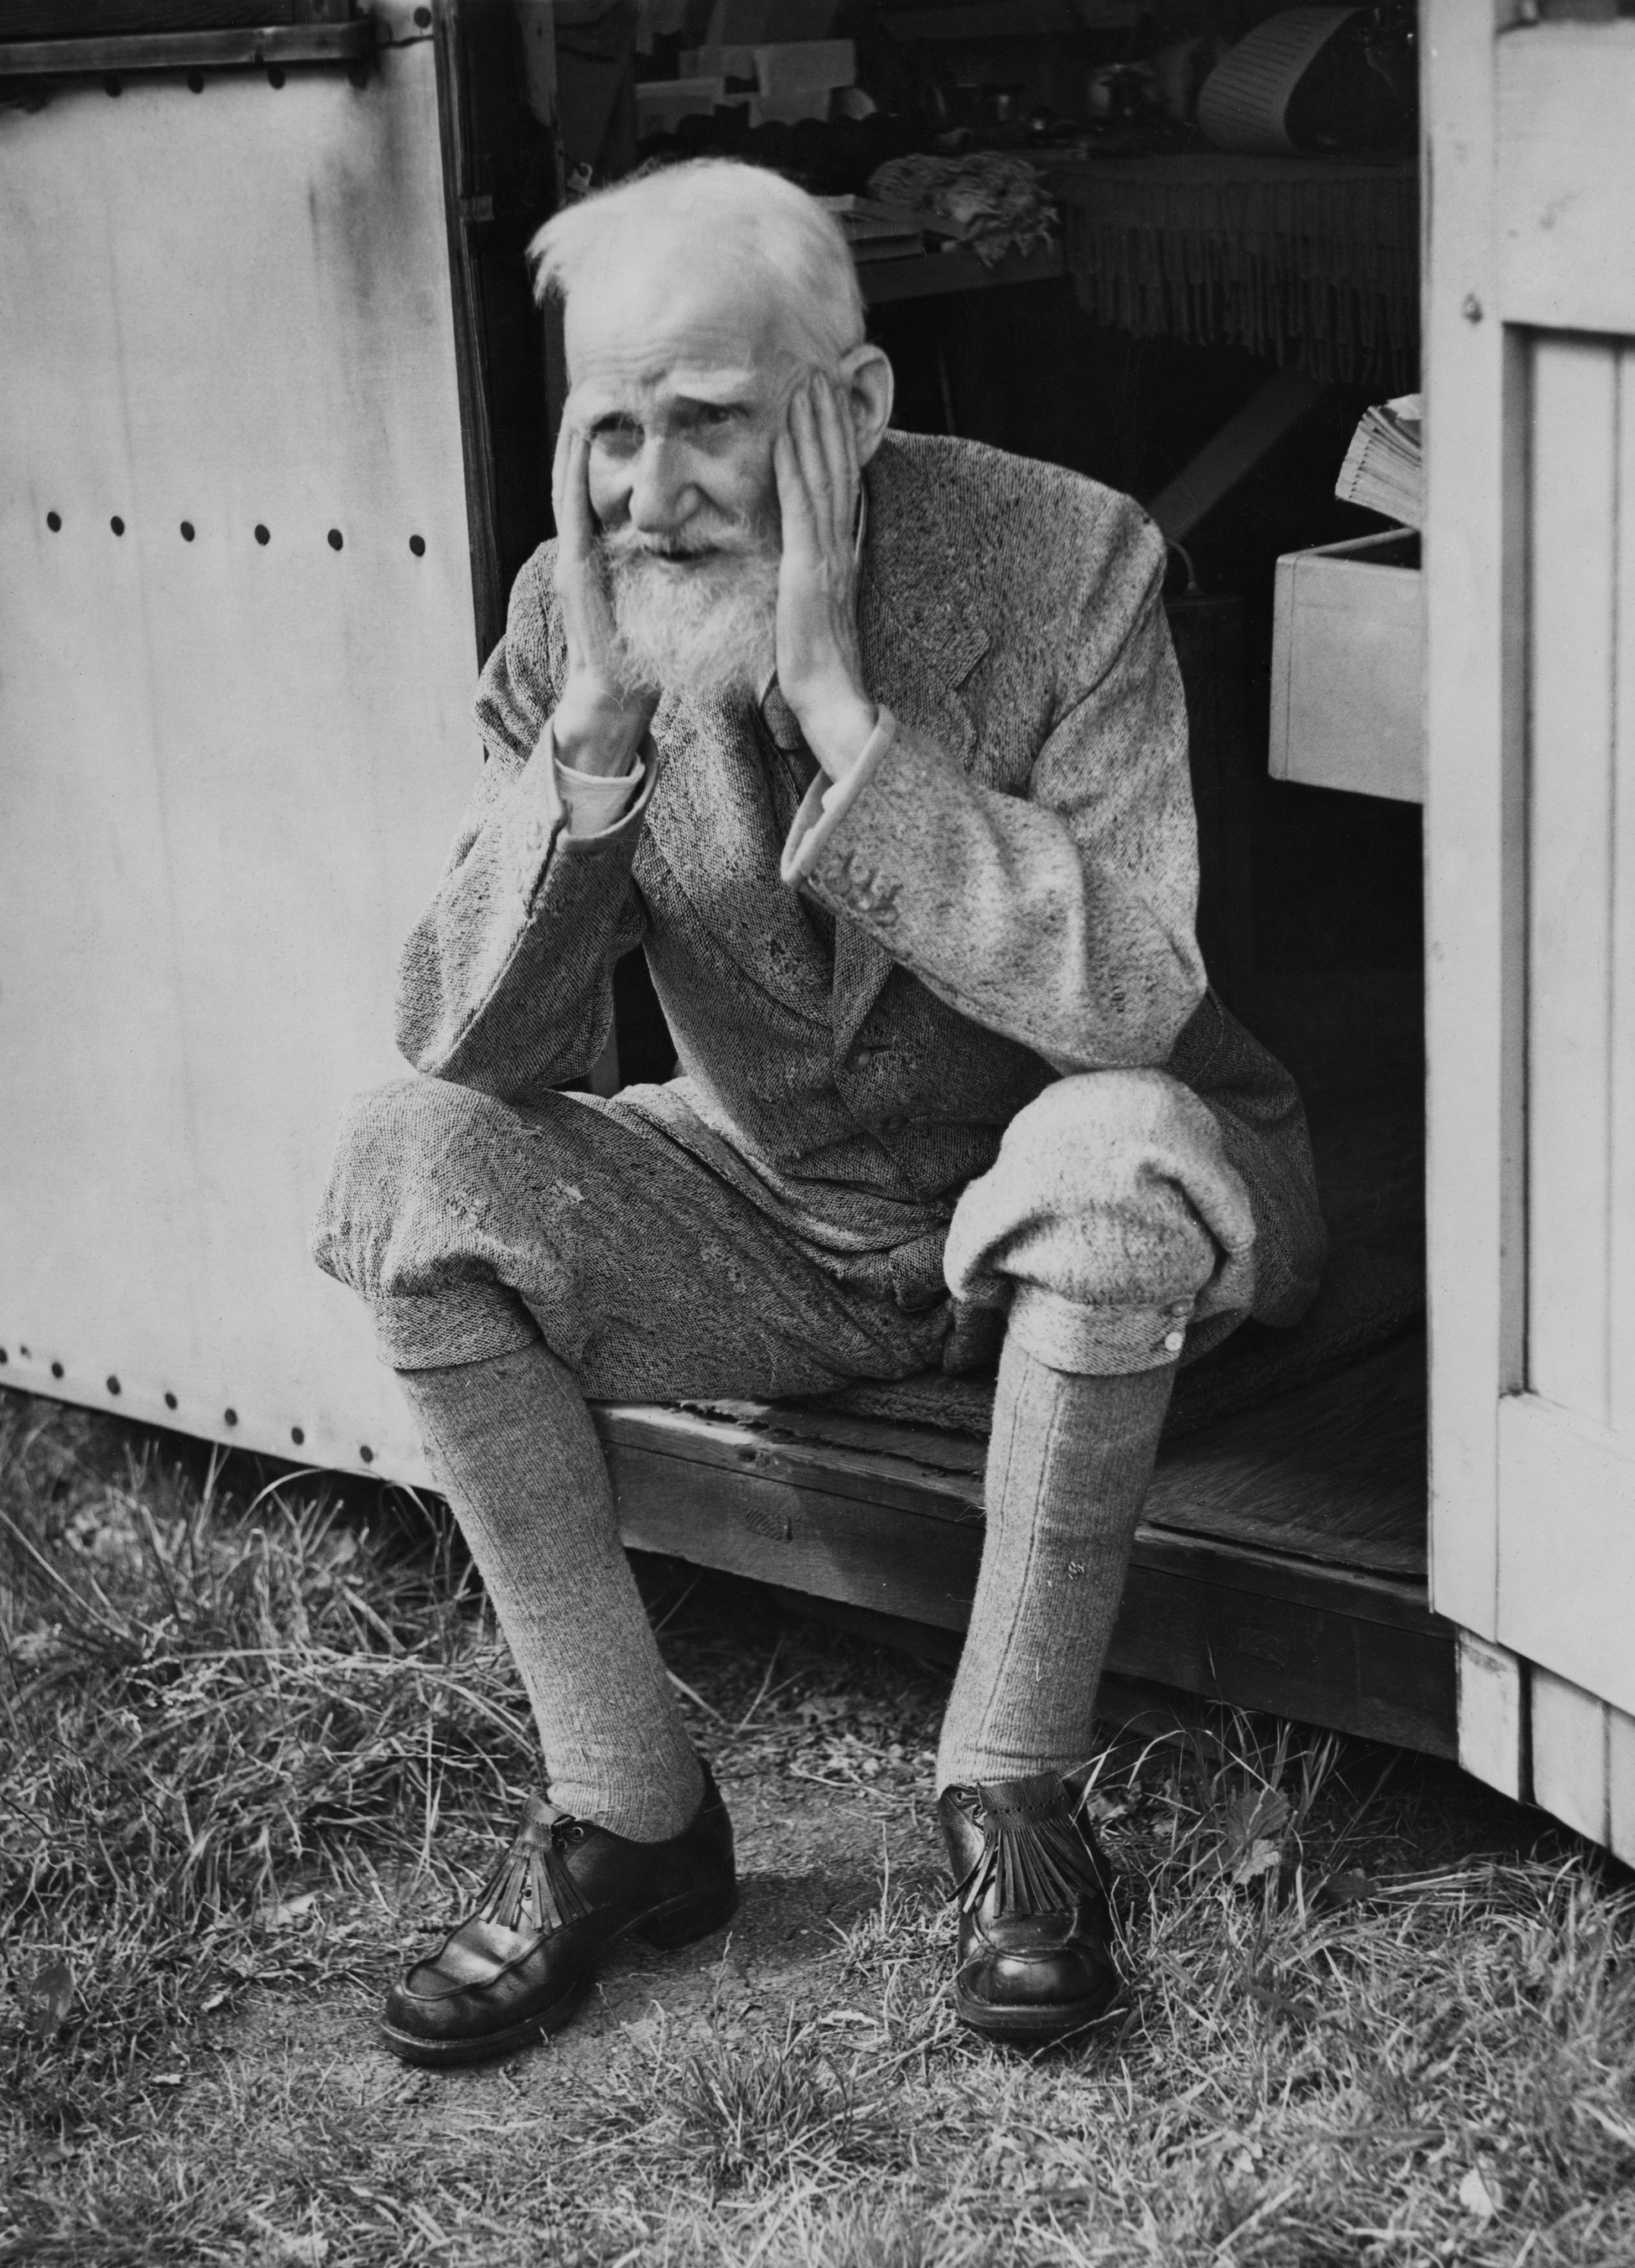 Despite living in Hertfordshire, George Bernard Shaw called his writing shack “London”. That way, his secretary could honestly say that Shaw had “gone to London” when he retreated to the backyard to write his Nobel Prize-winning plays.